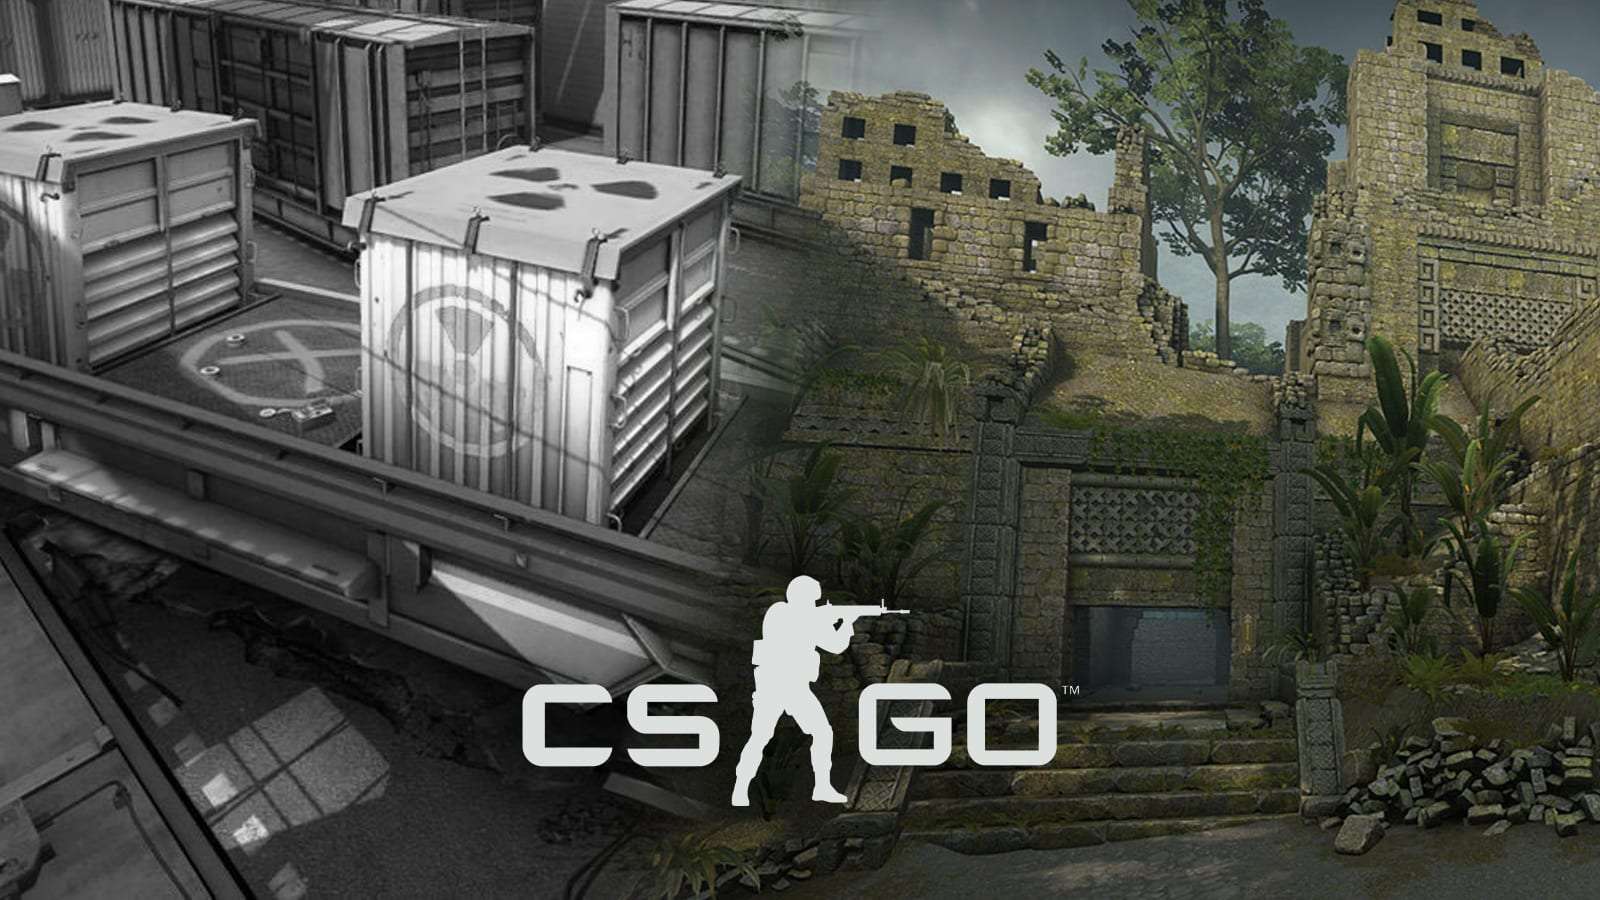 Train removed from CSGO for Ancient